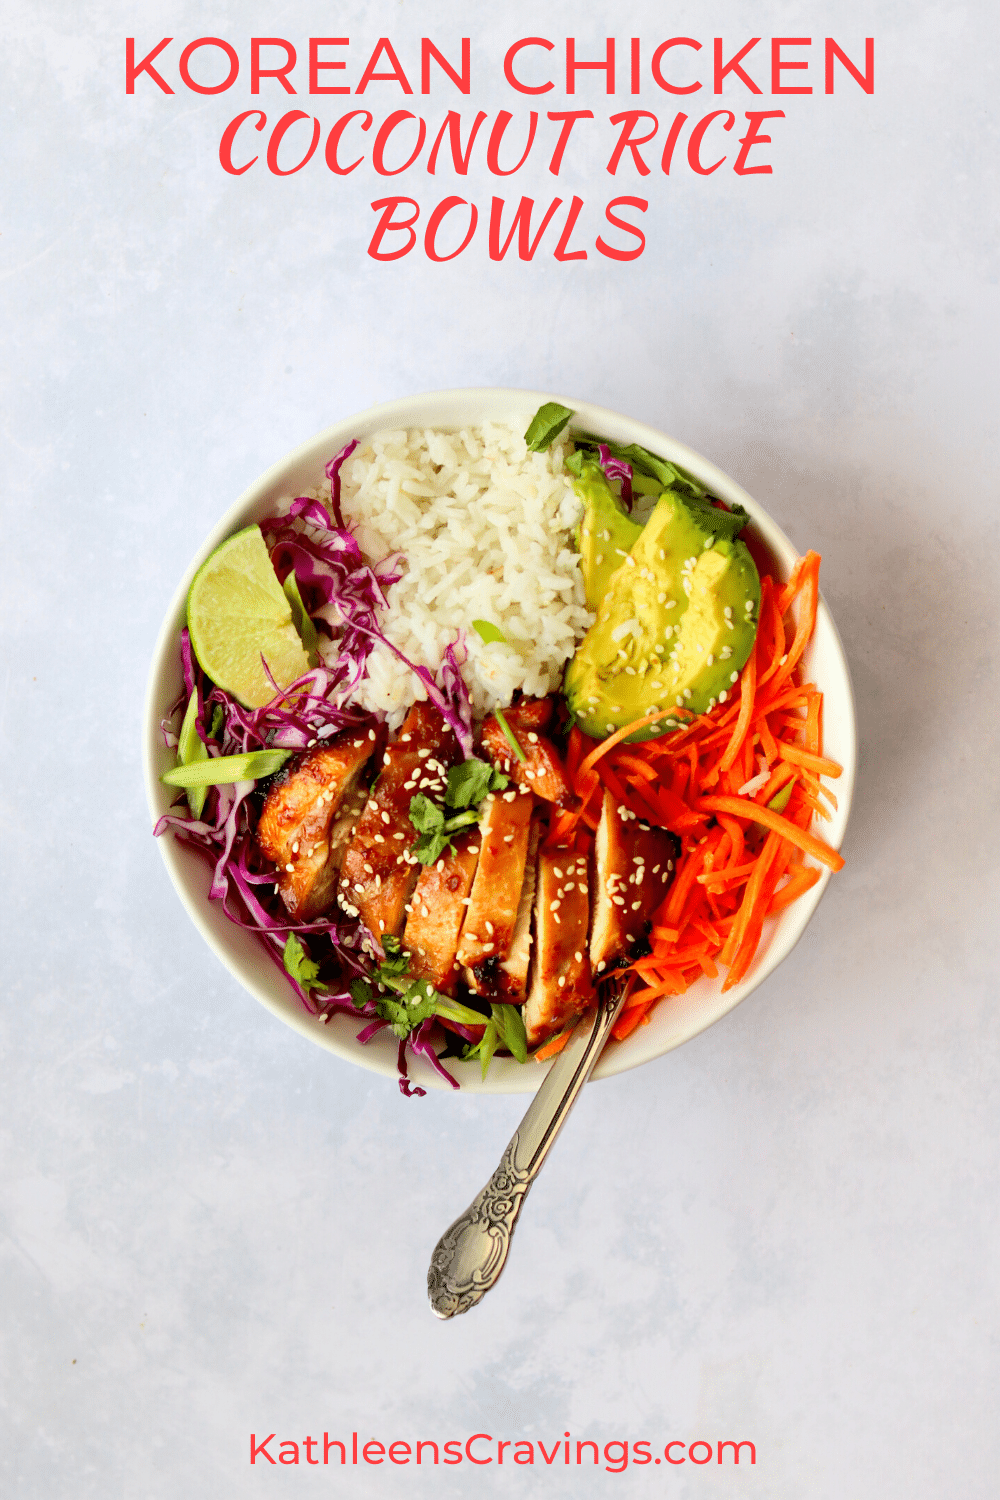 Korean chicken rice bowl with chicken thigh, carrots, cabbage, avocado, and a lime wedge.